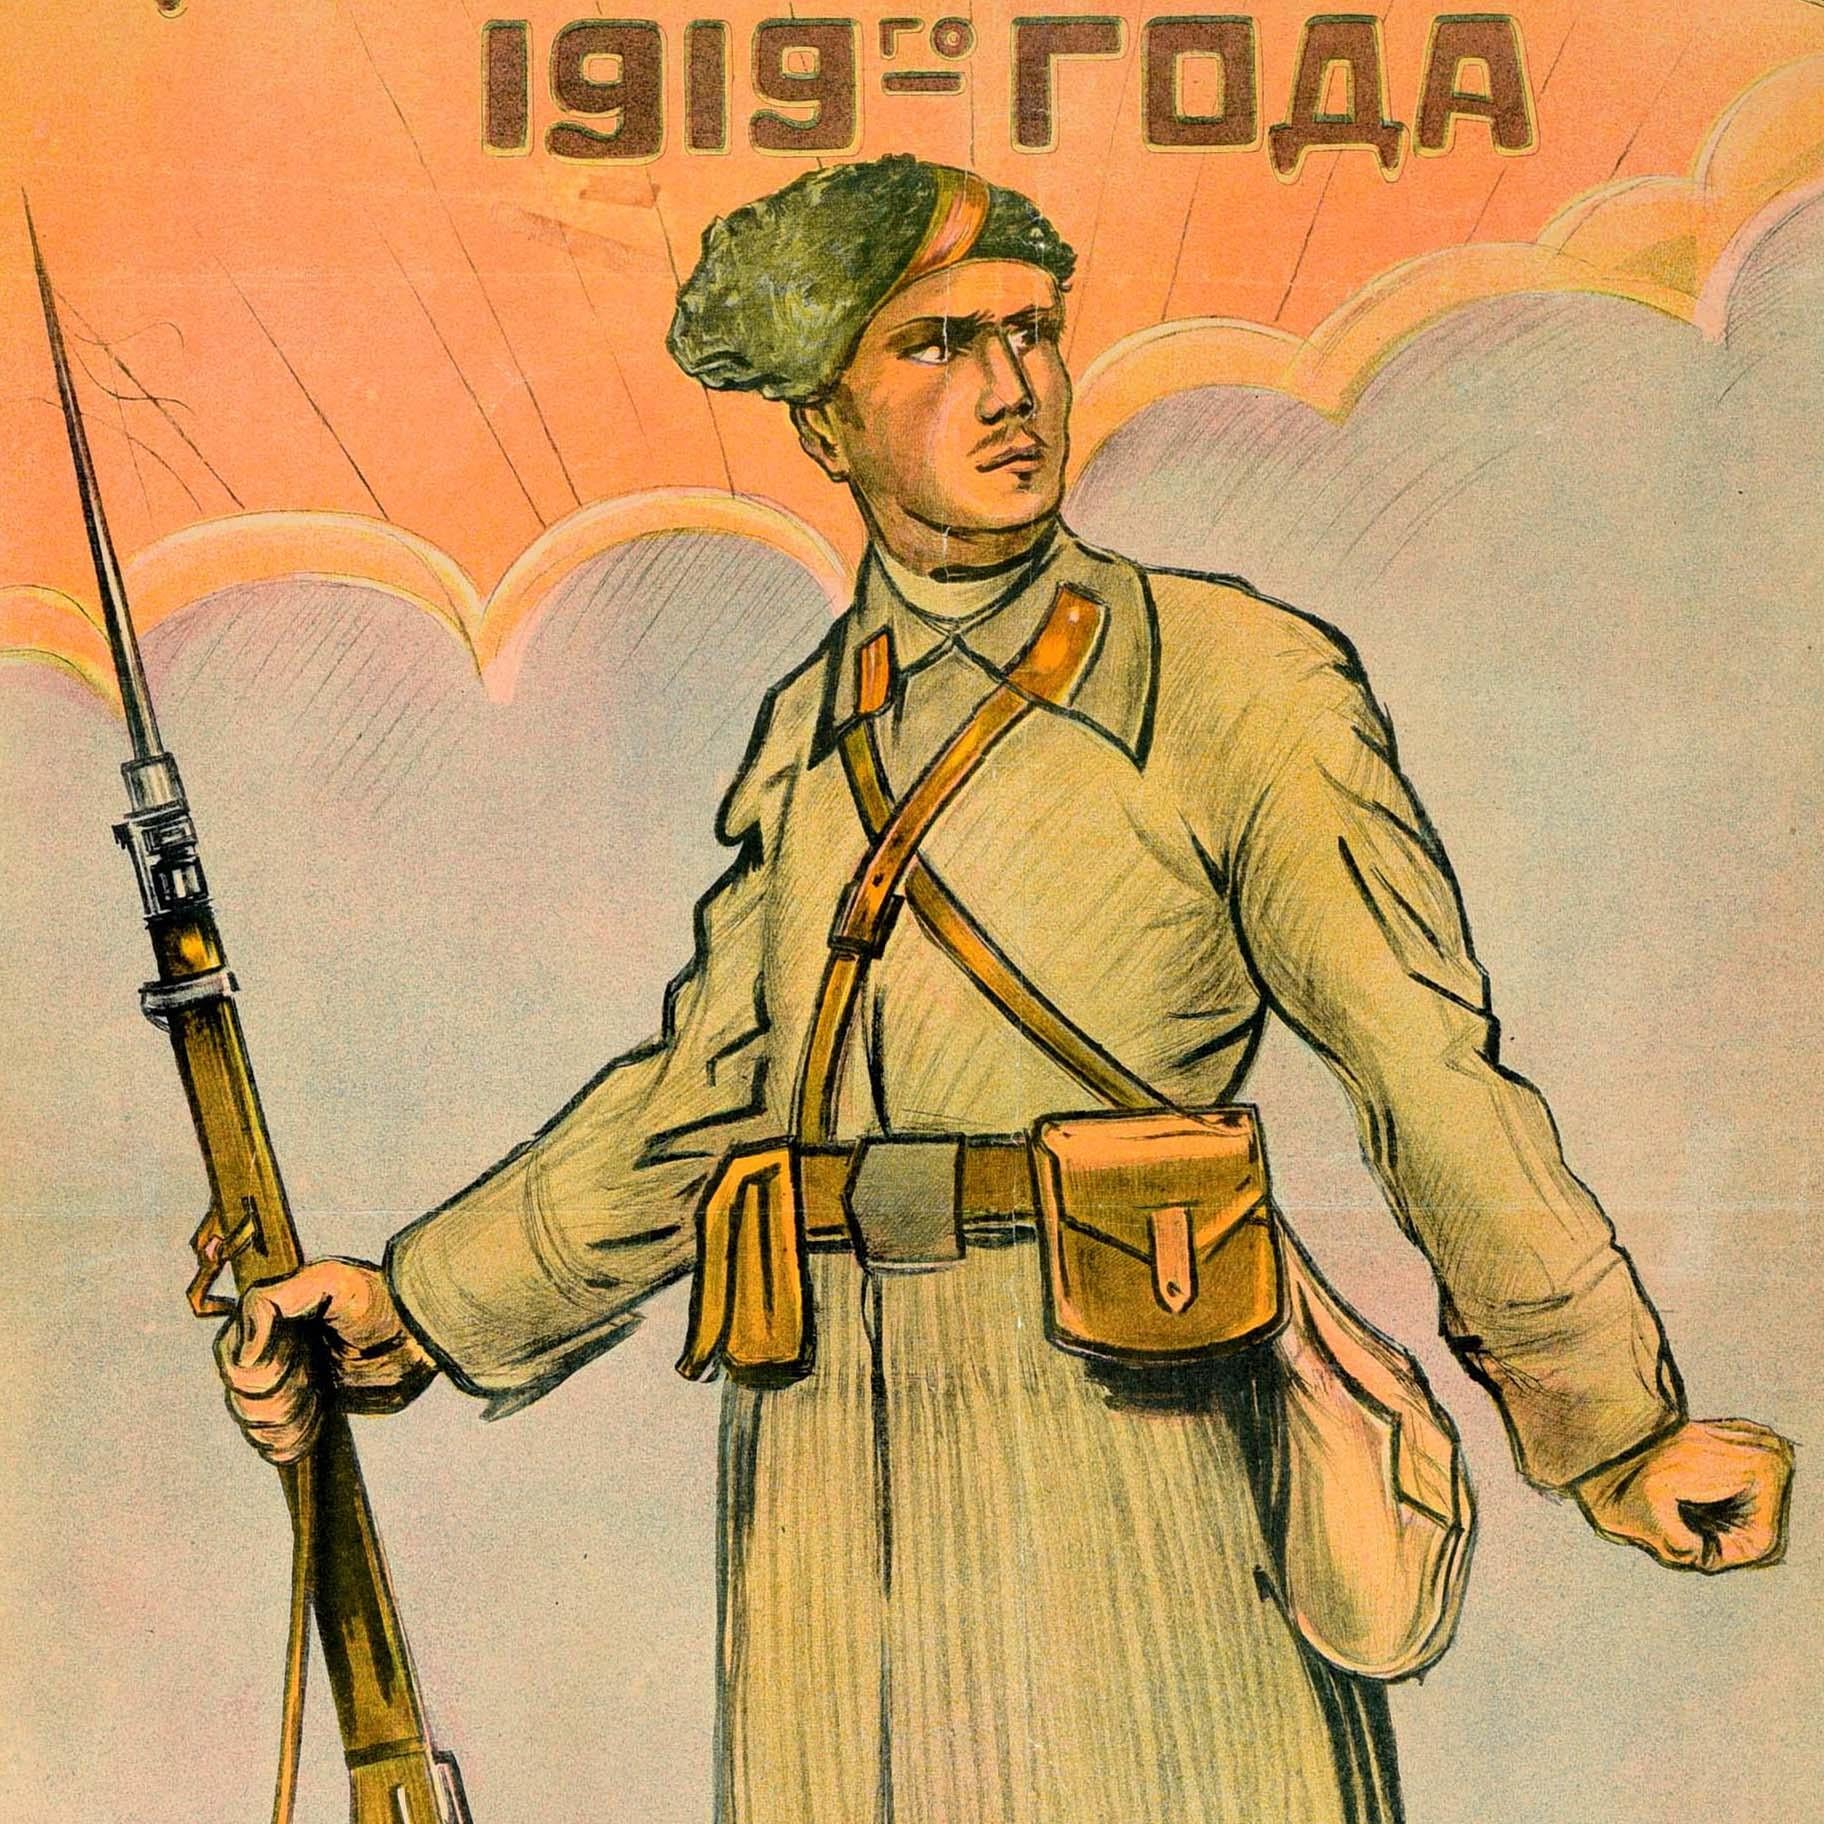 Original antique Soviet propaganda poster - Red Army man from the year 1919 / ?????? ?????? 1919 ?? ???? - featuring an illustration of a soldier in uniform holding a gun with the title text in bold stylised lettering above dramatic rays of sun